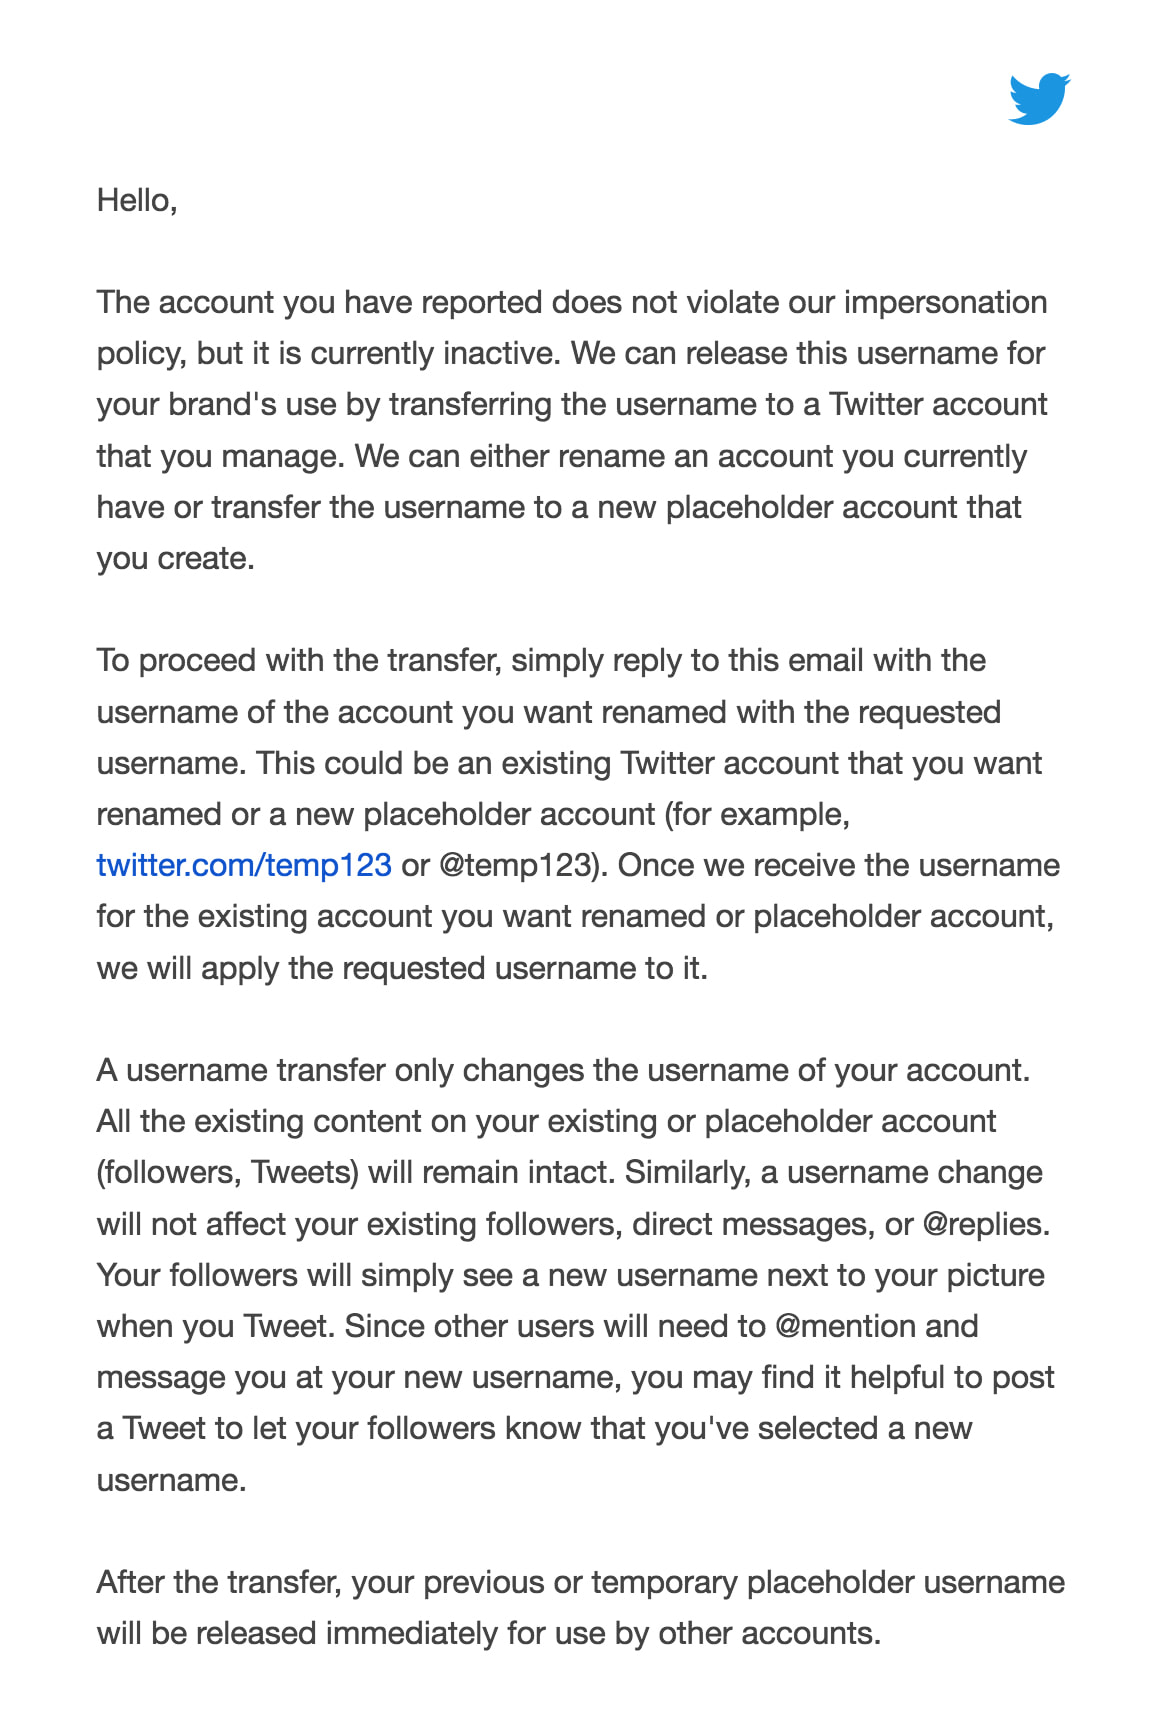 How We Bought userlist.com & Rebranded as Userlist: Screenshot of Twitter team's response to our query